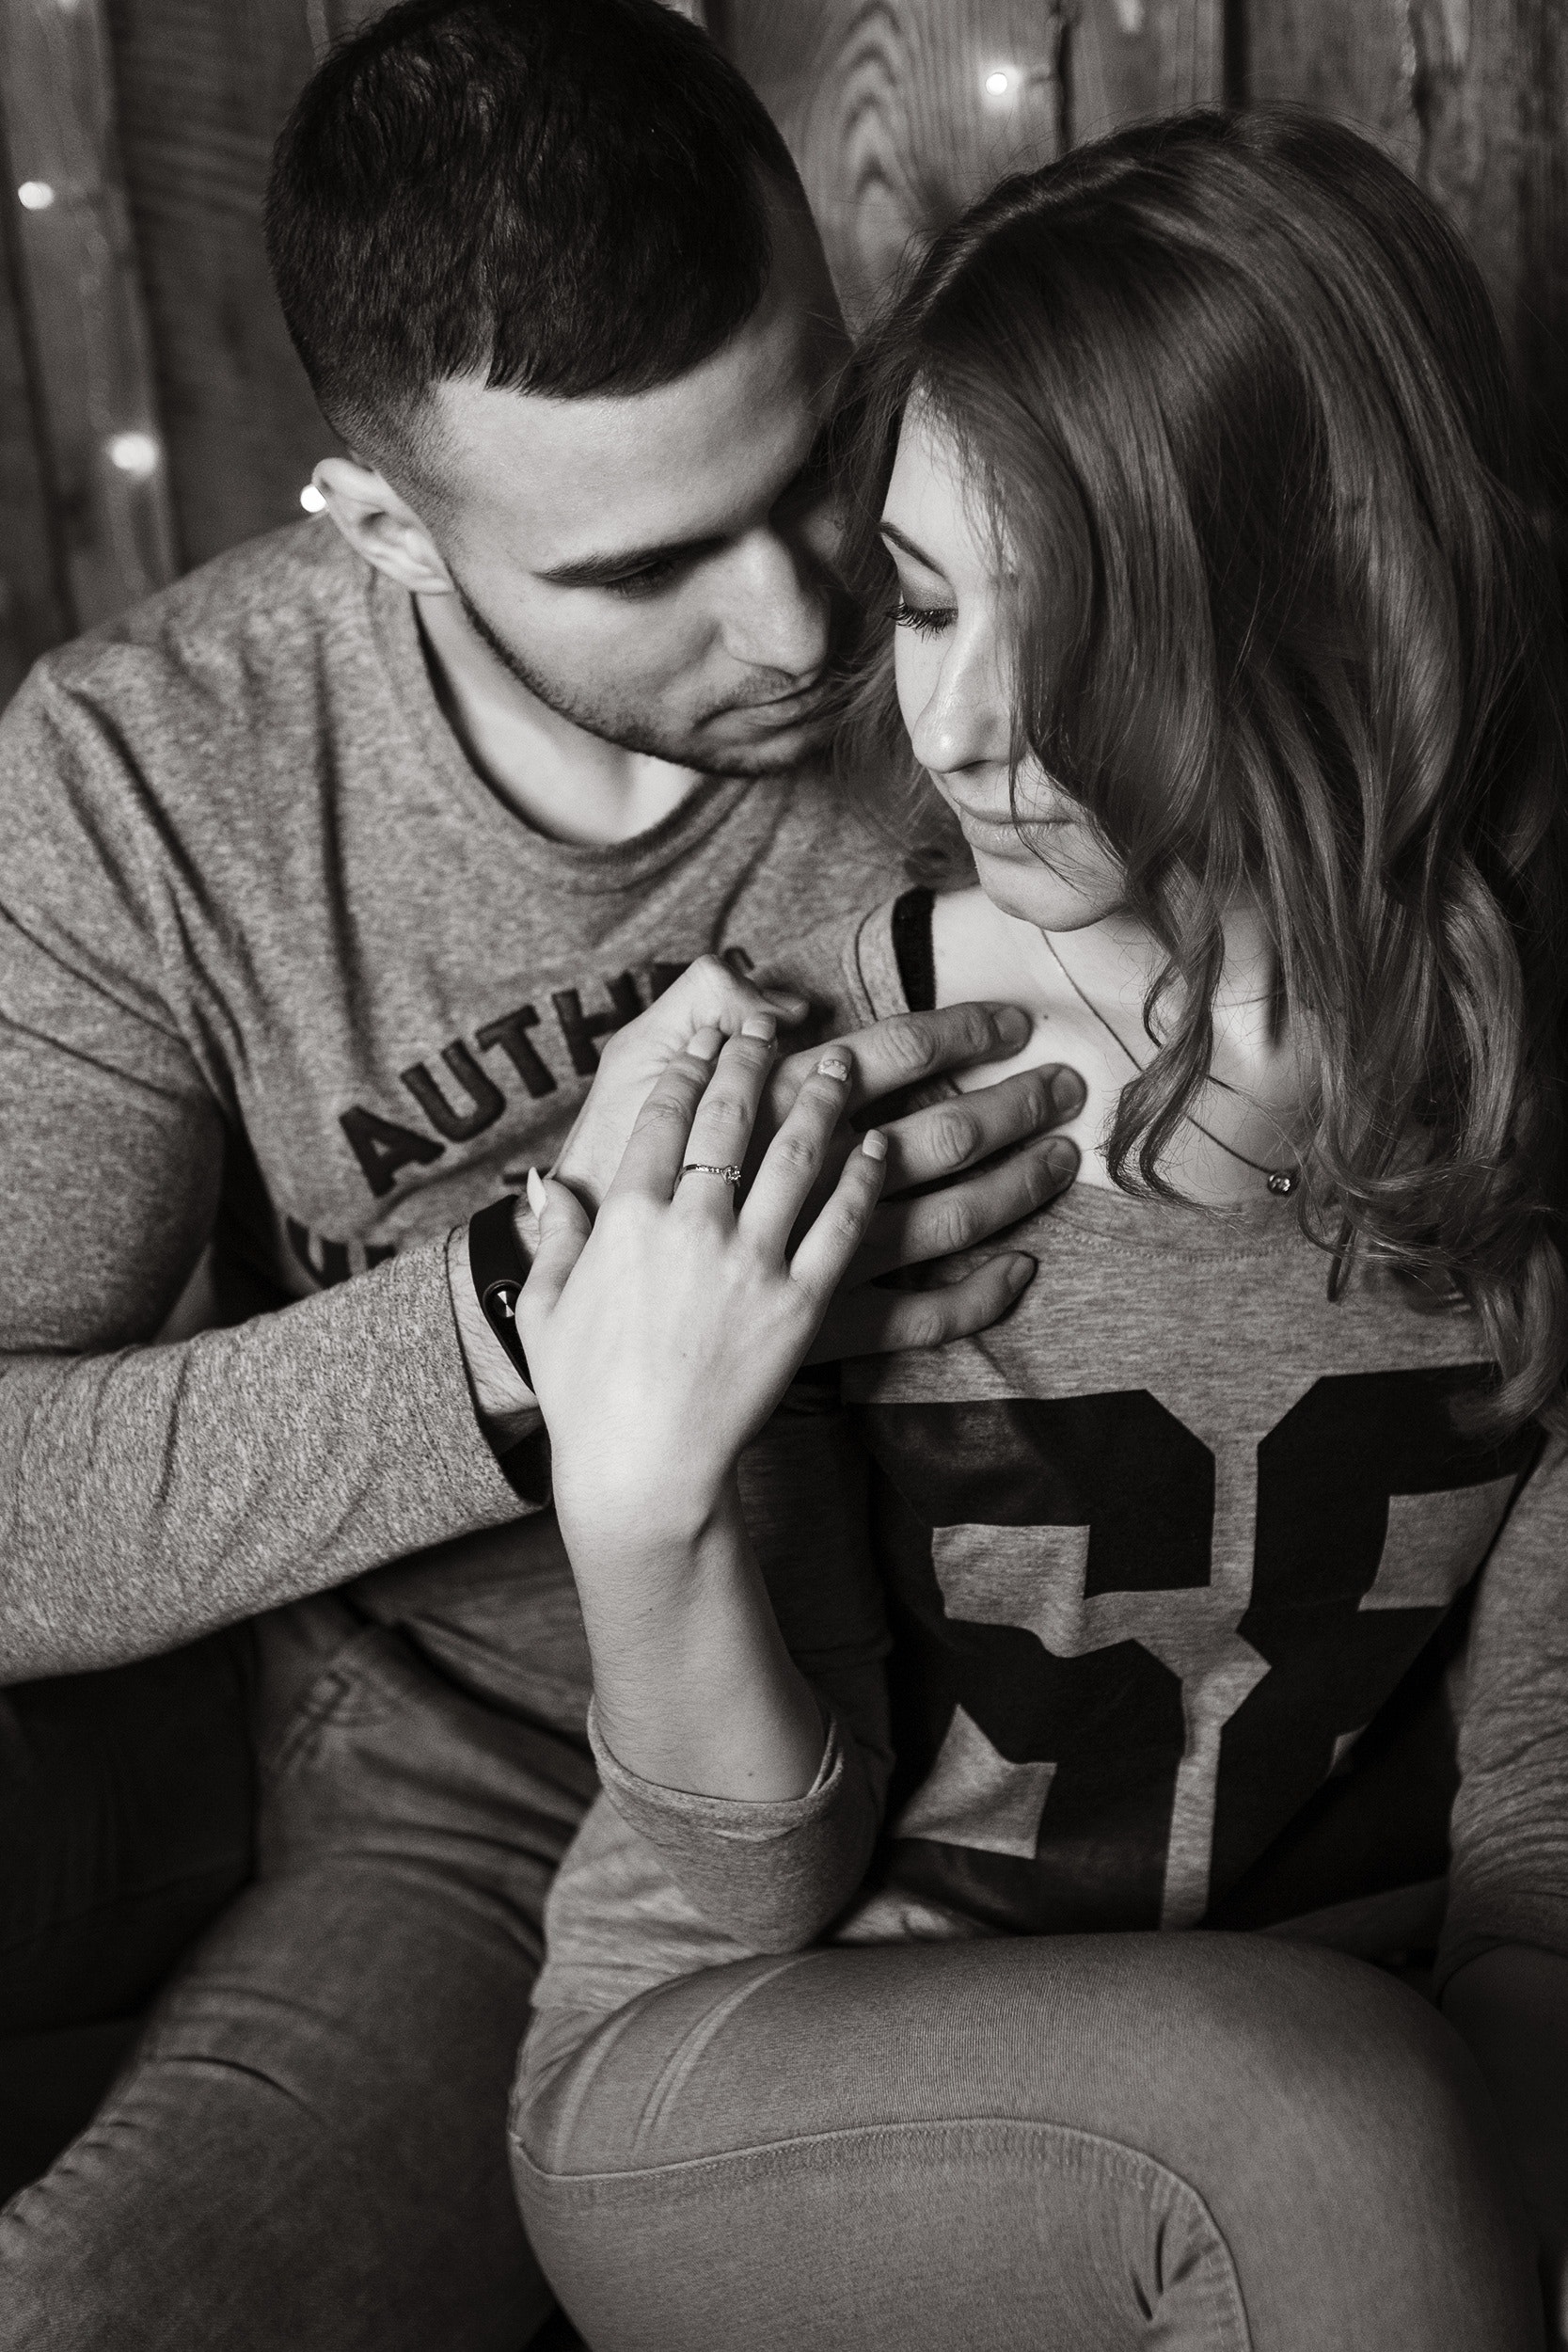 View of Couple Holding Hands, Adult, Joy, Photoshoot, People, HQ Photo